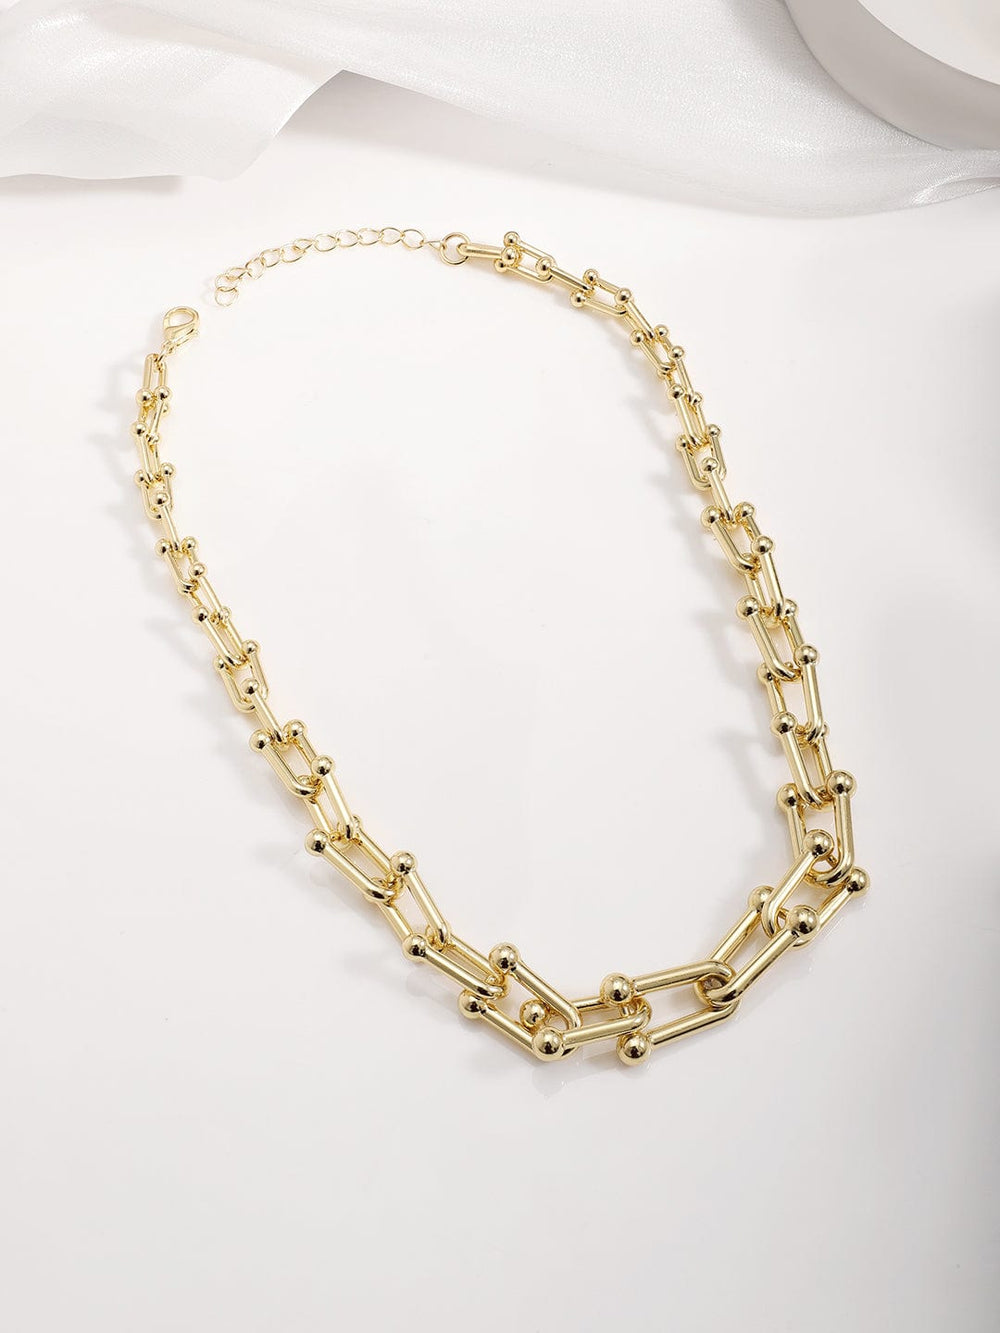 22KT Gold Plated Brass Intricate Linked Necklace Necklace & Chains